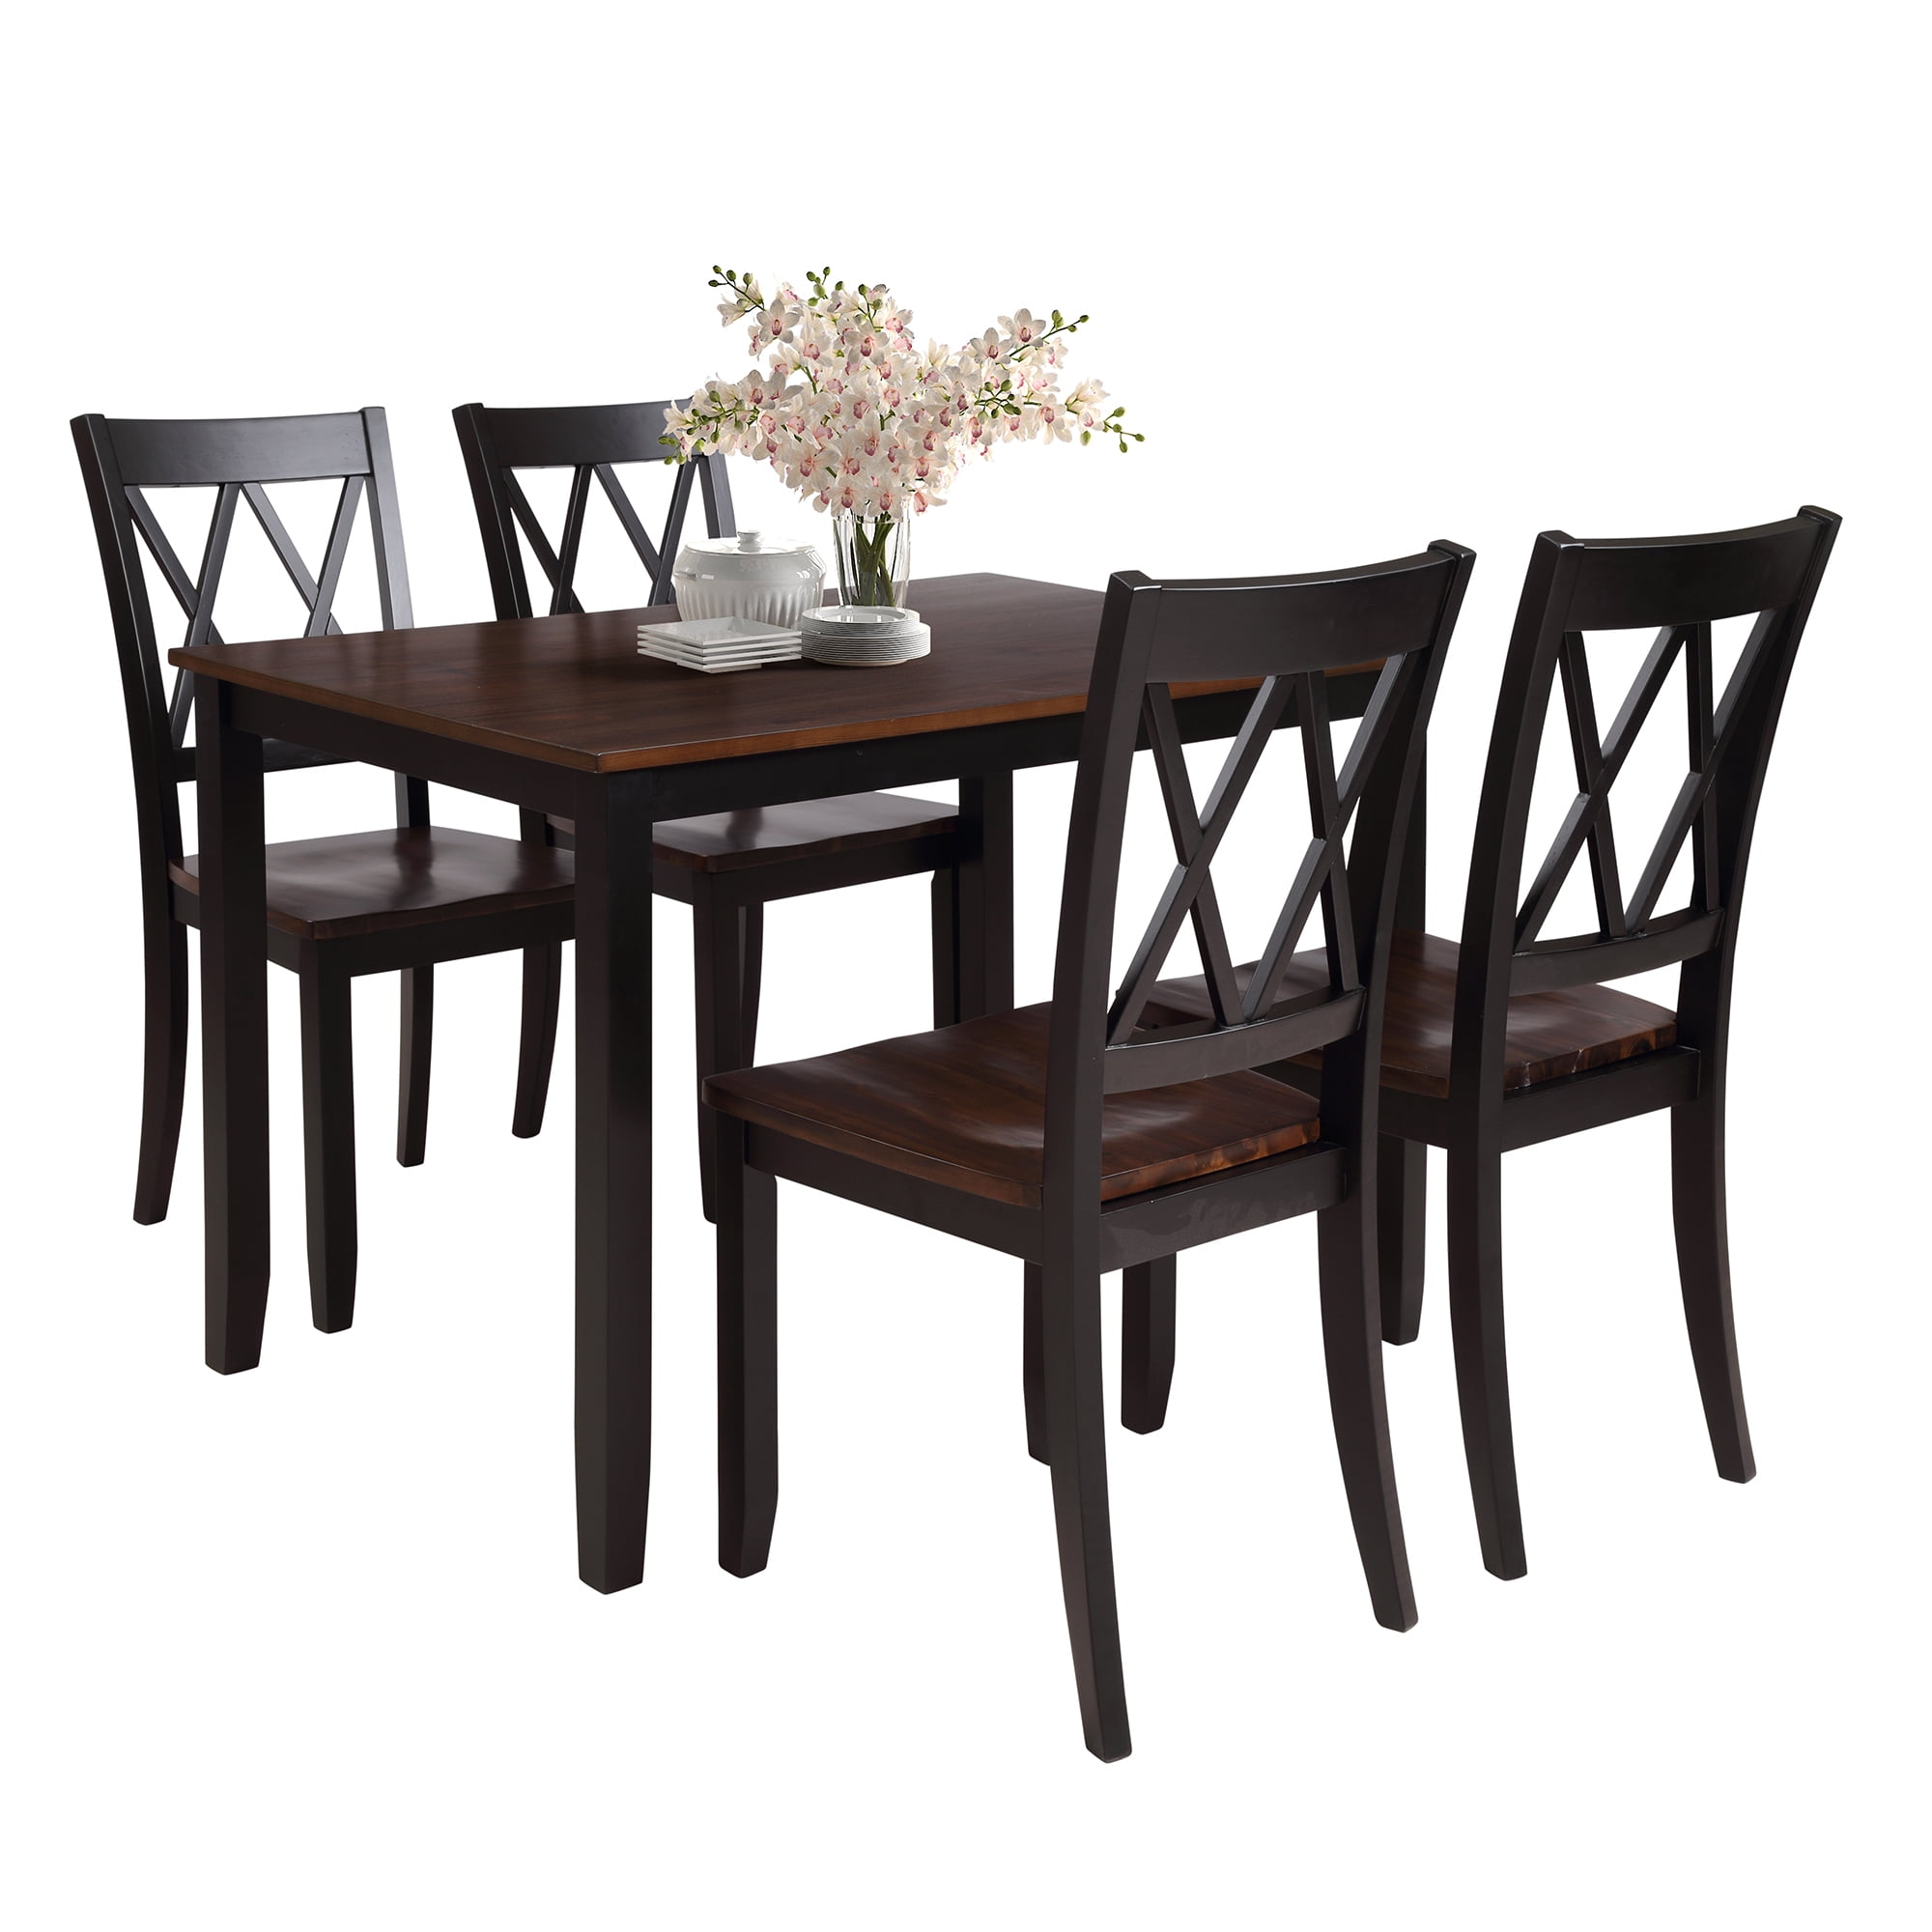 Black Dining Table Set for 4, Modern 5 Piece Dining Room Table Sets